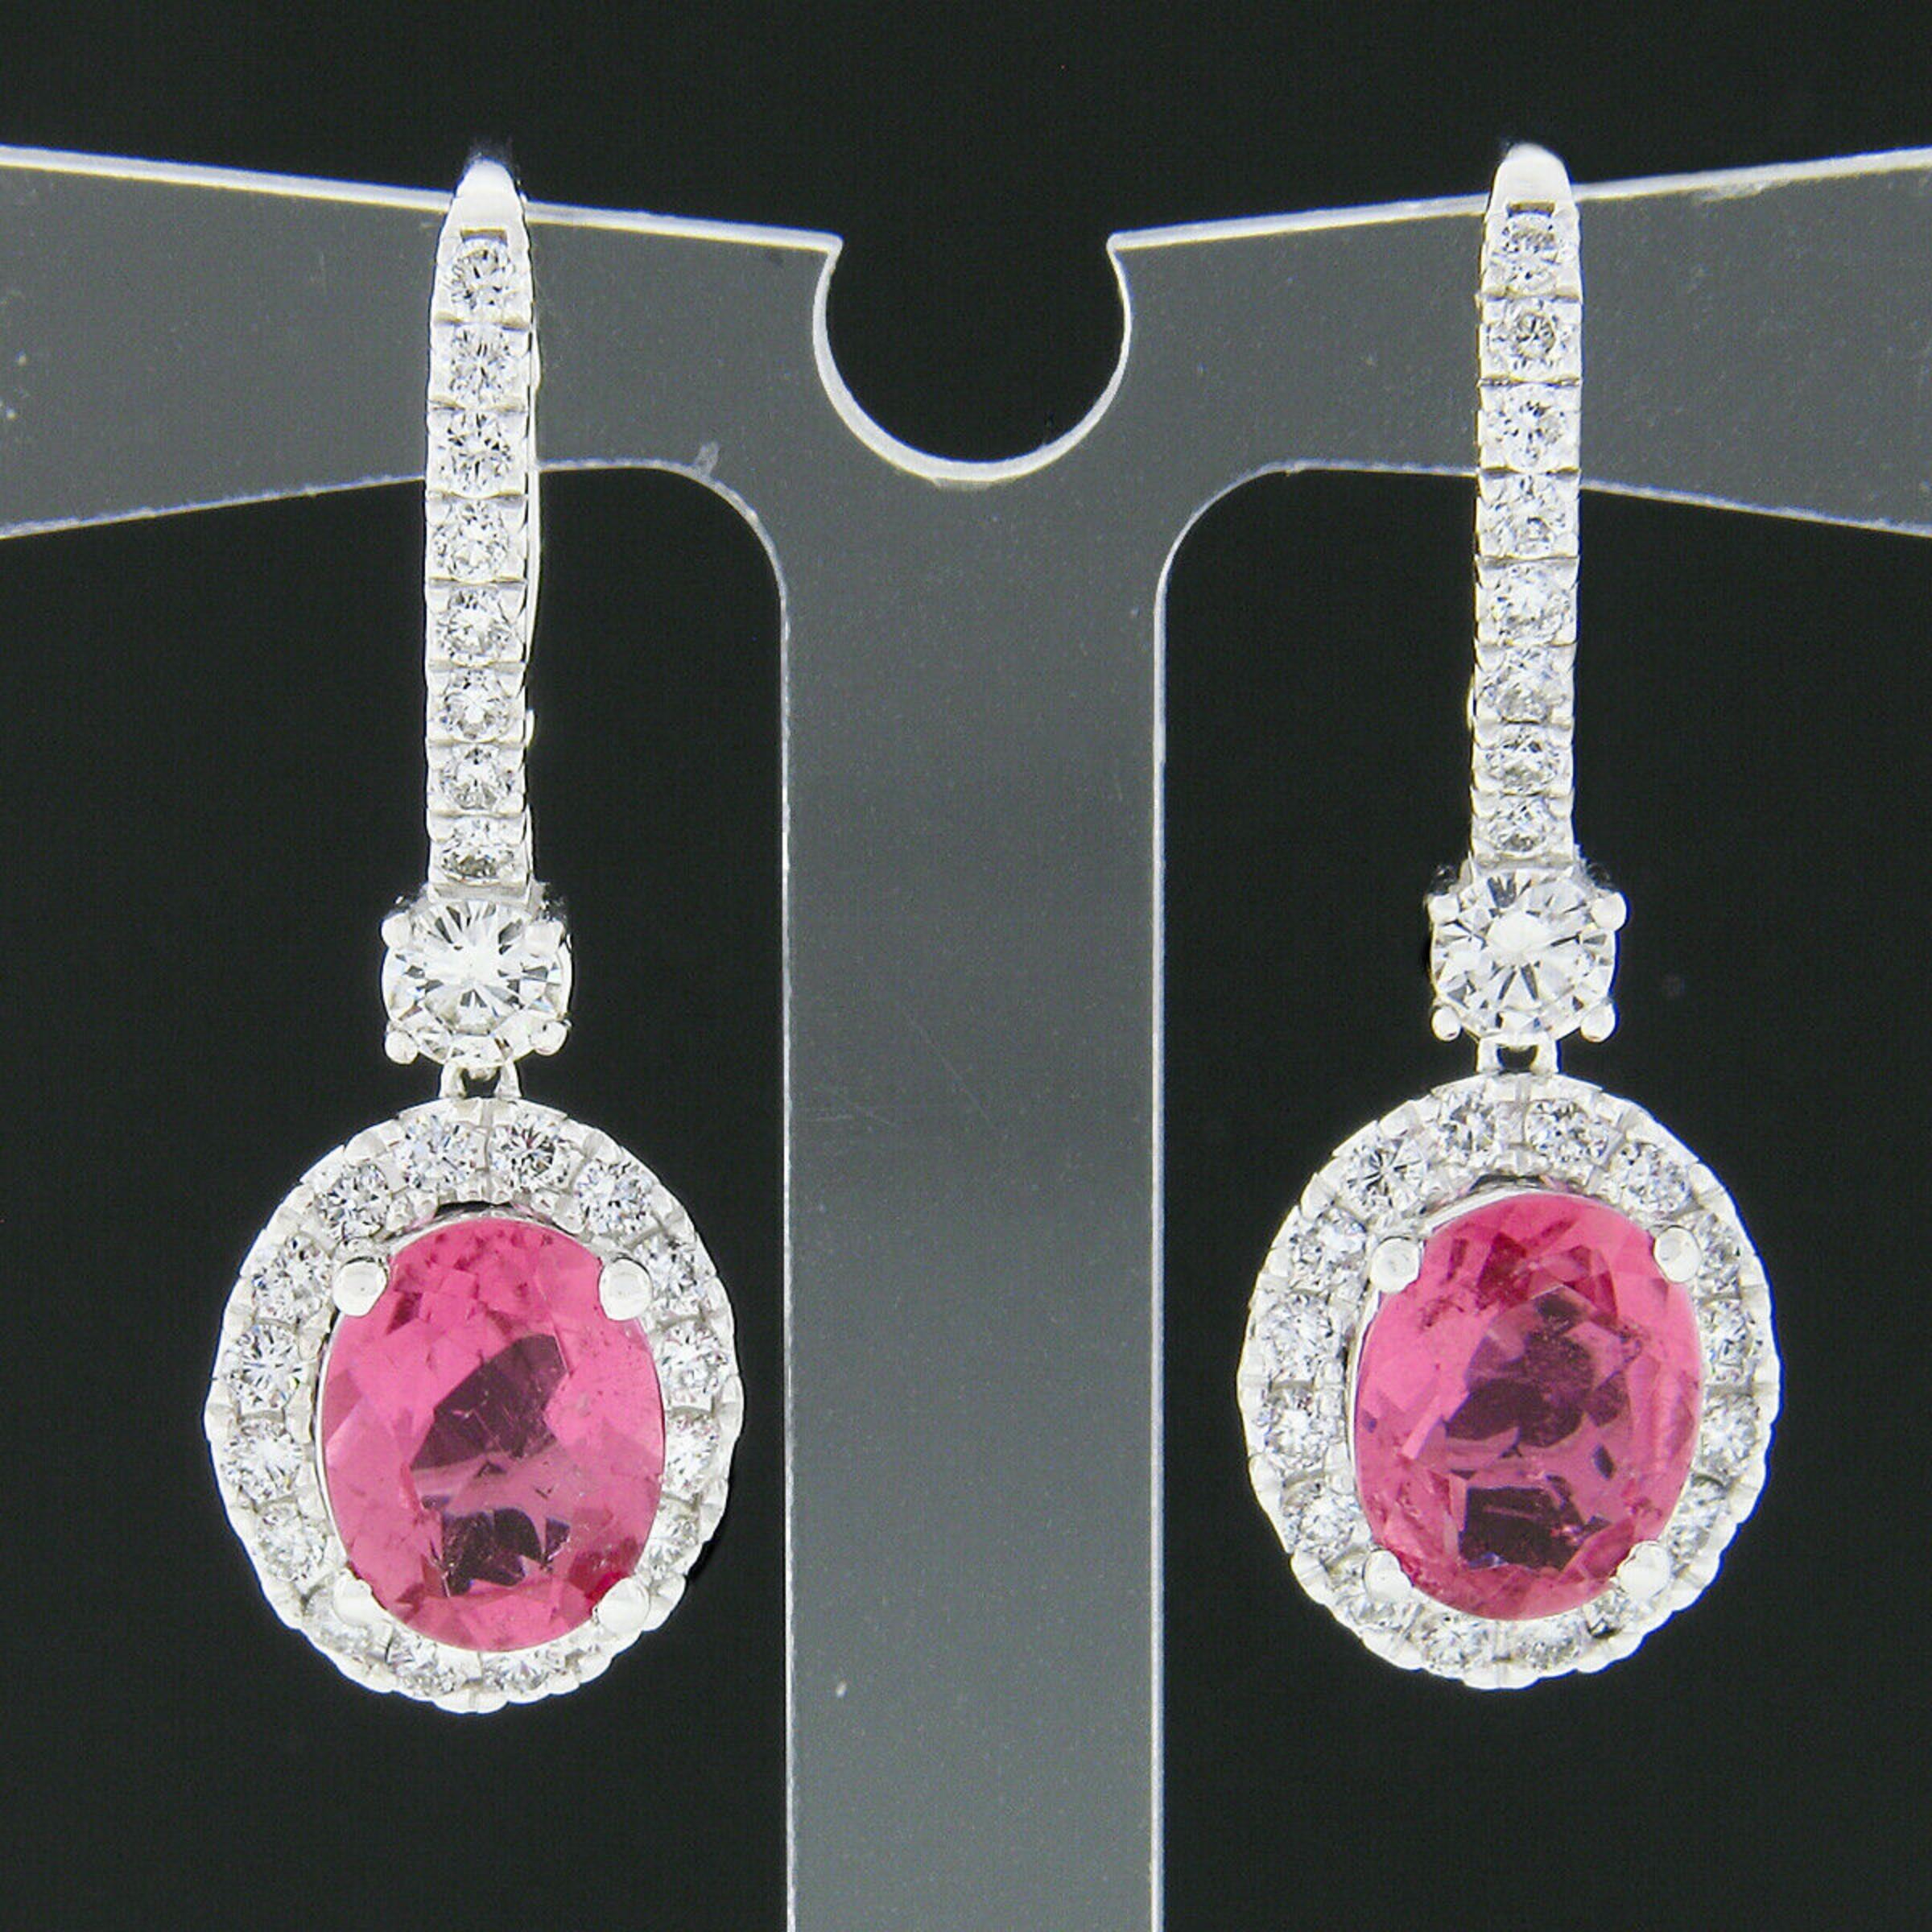 These gorgeous earrings were crafted from solid 18k white gold and feature a drop dangle style that carries a stunning pink tourmaline with fine round brilliant cut diamonds throughout. The top of the earrings are lined with diamonds with a large